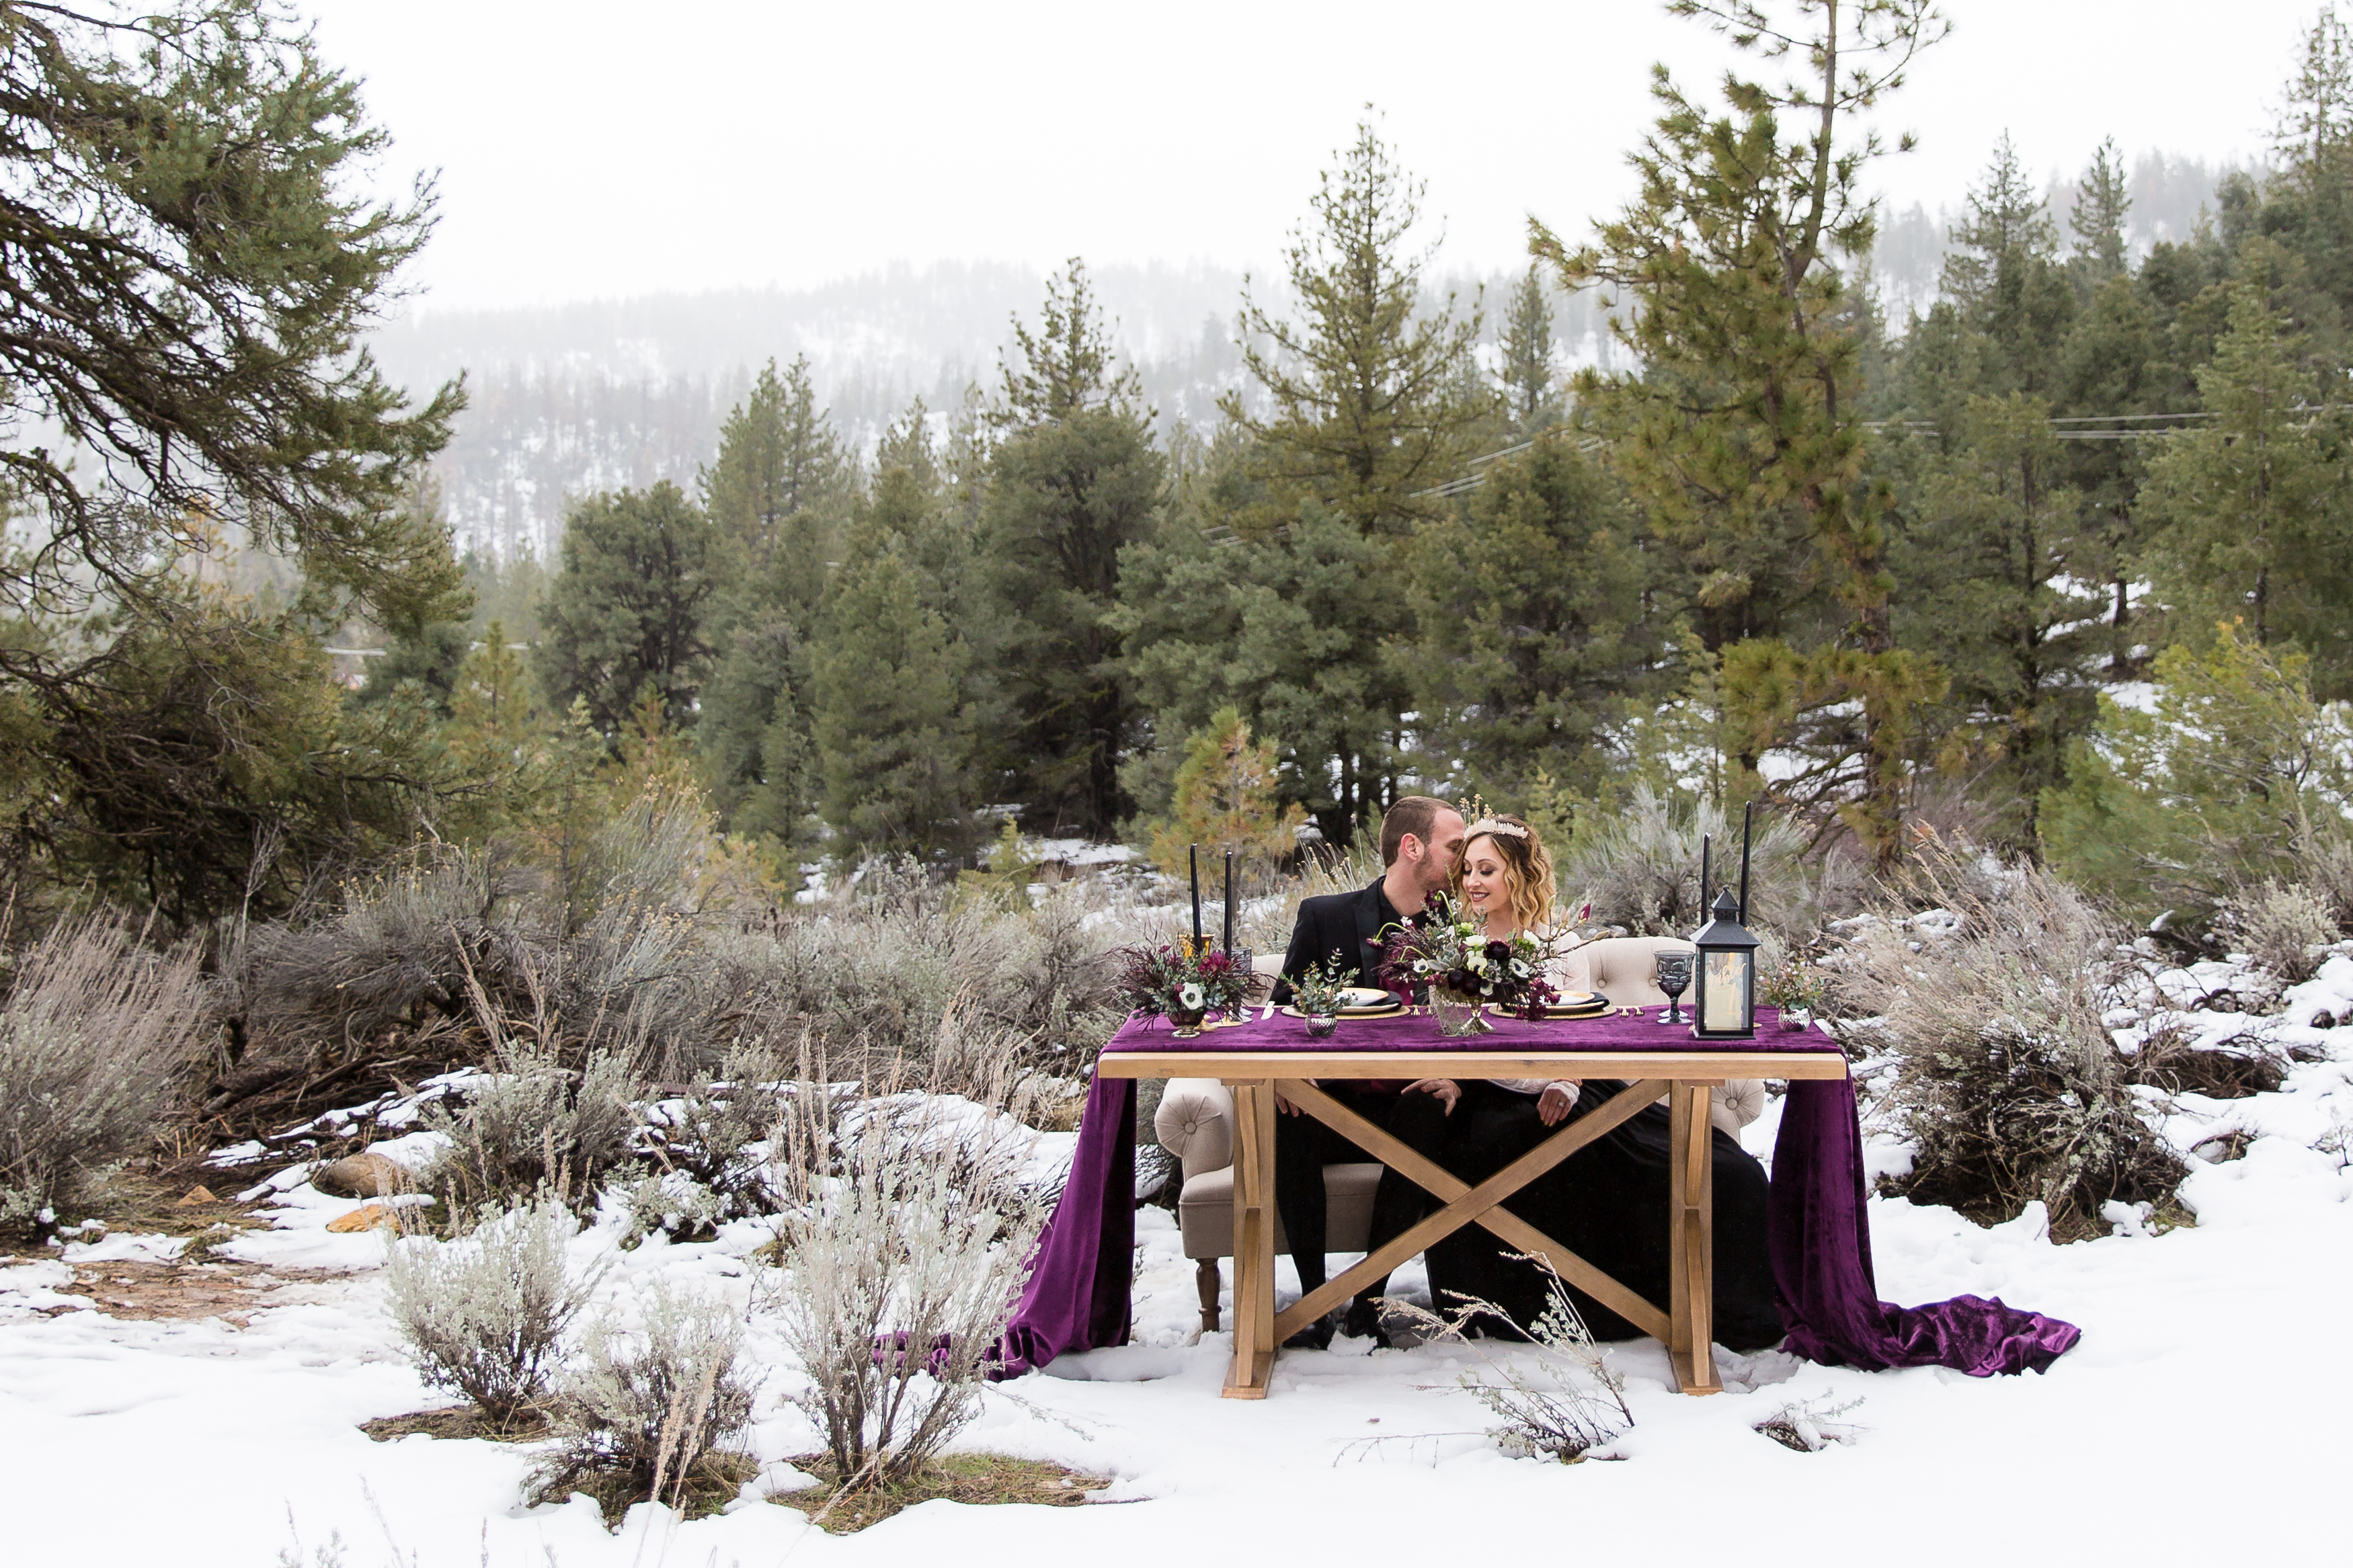 Groom whispering into fiancé's ear at sweetheart table in snow in CA